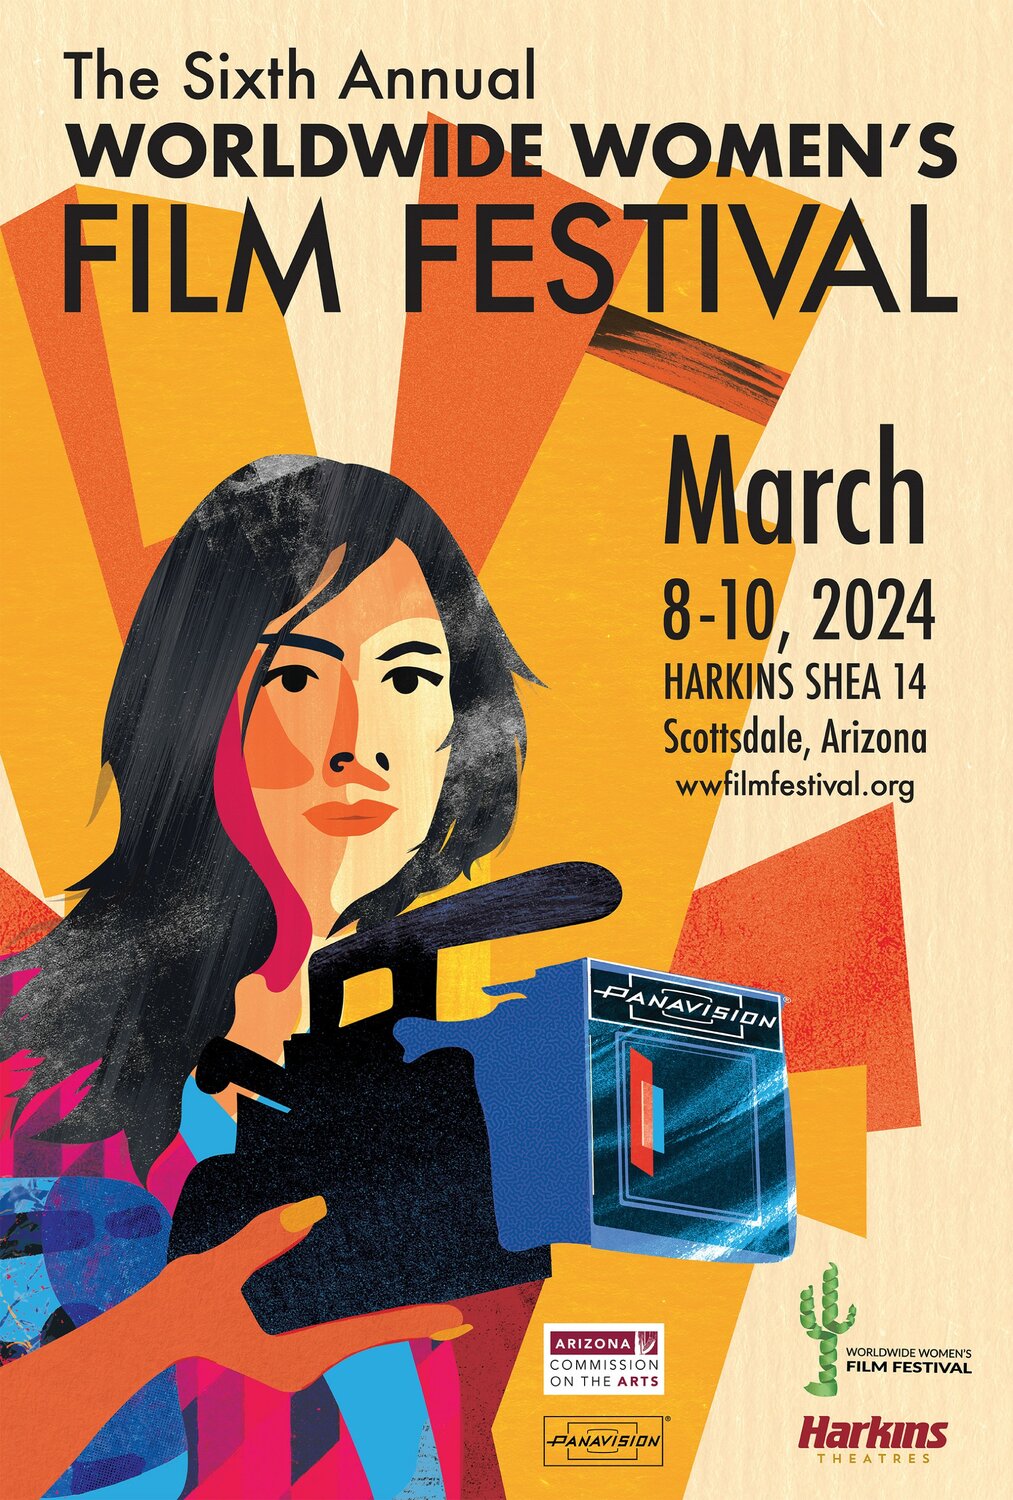 The 2024 nonprofit Worldwide Women’s Film Festival is March 8-10, rescheduled to be part of International Women’s Day March 8.